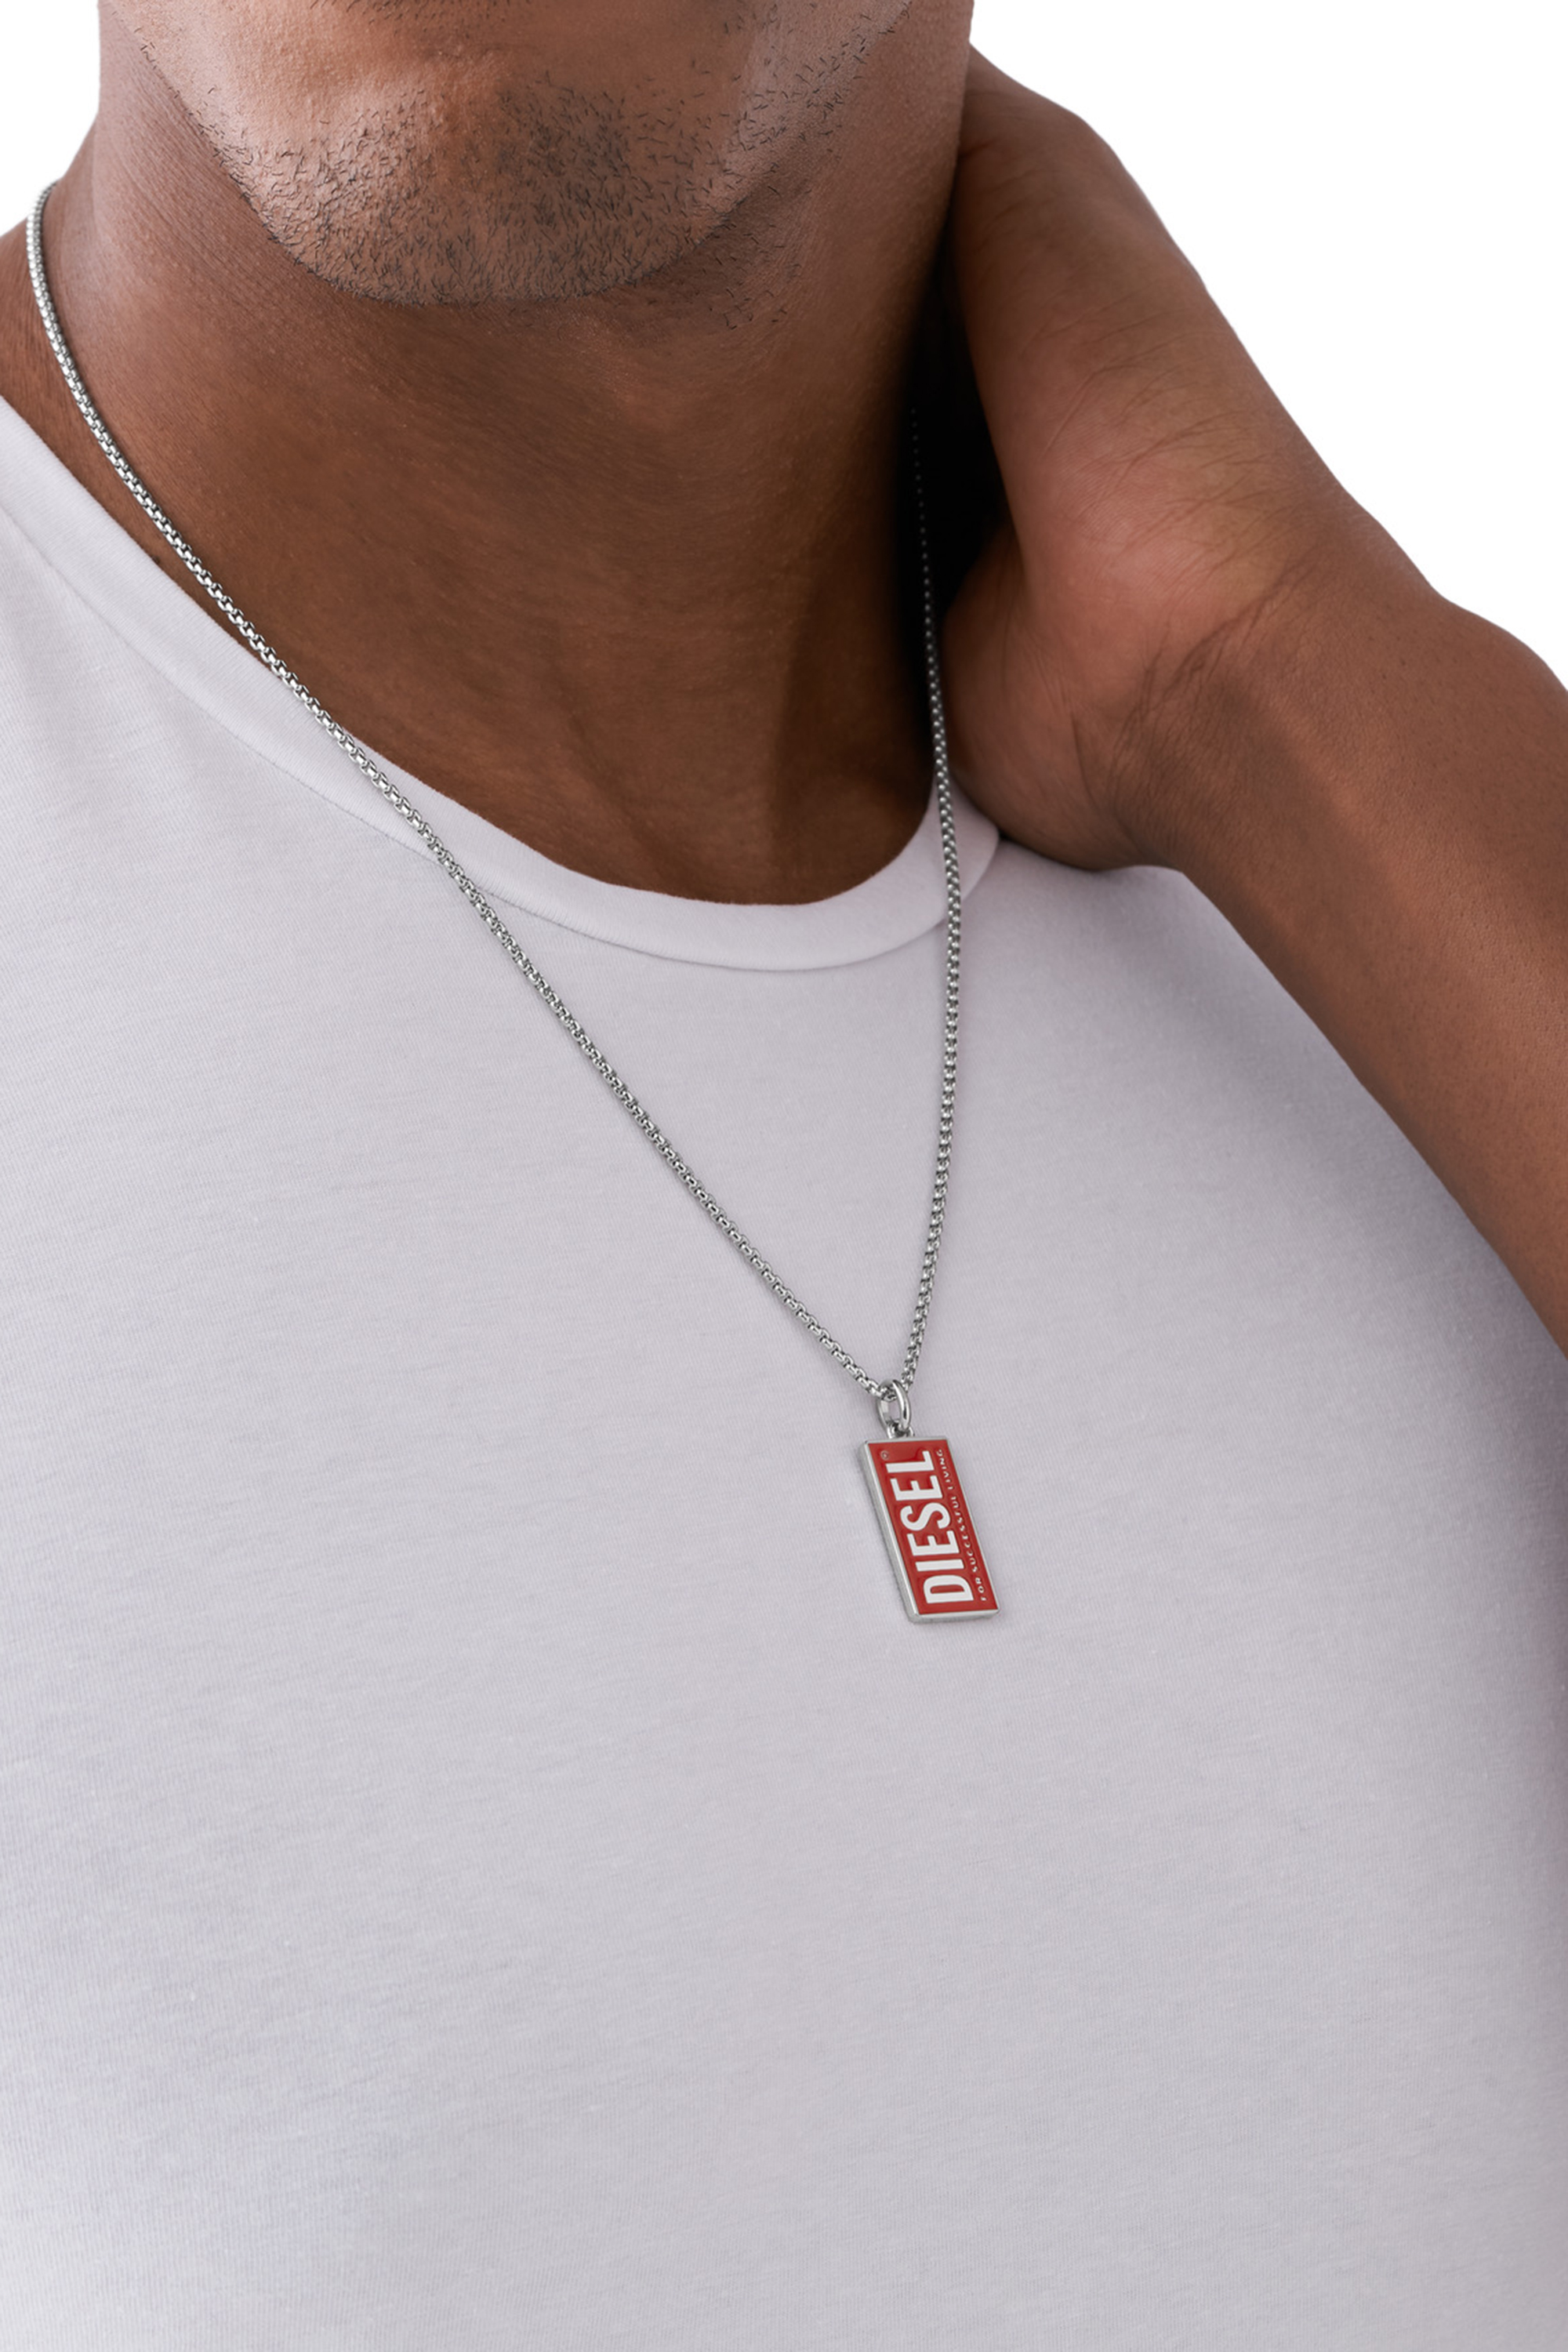 Diesel - DX1368, Unisex Stainless Steel Logo Dog Tag Necklace in Red - Image 3